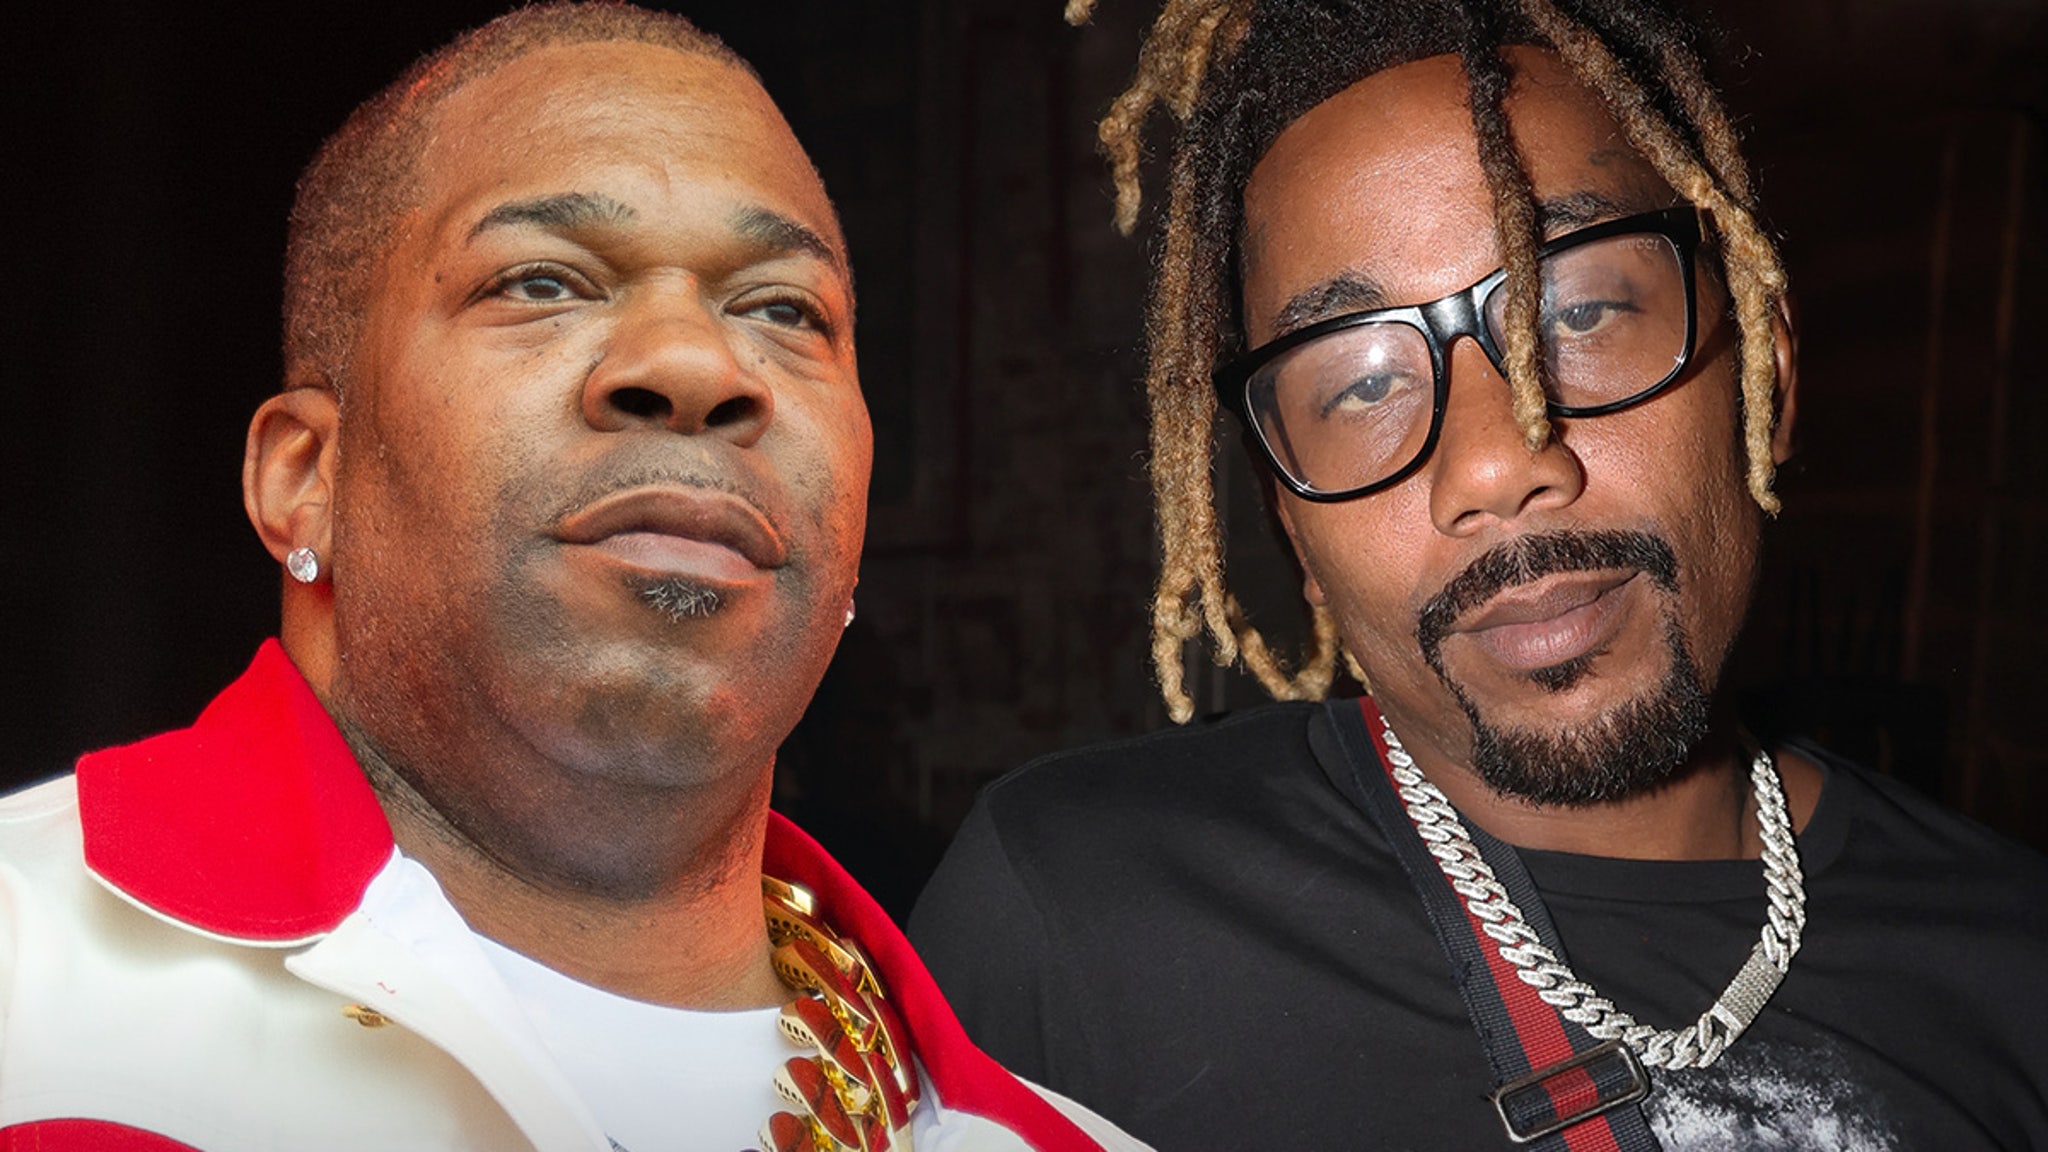 Busta Rhymes Appears To Get In Physical Altercation With Rapper Nizzle Man #BustaRhymes